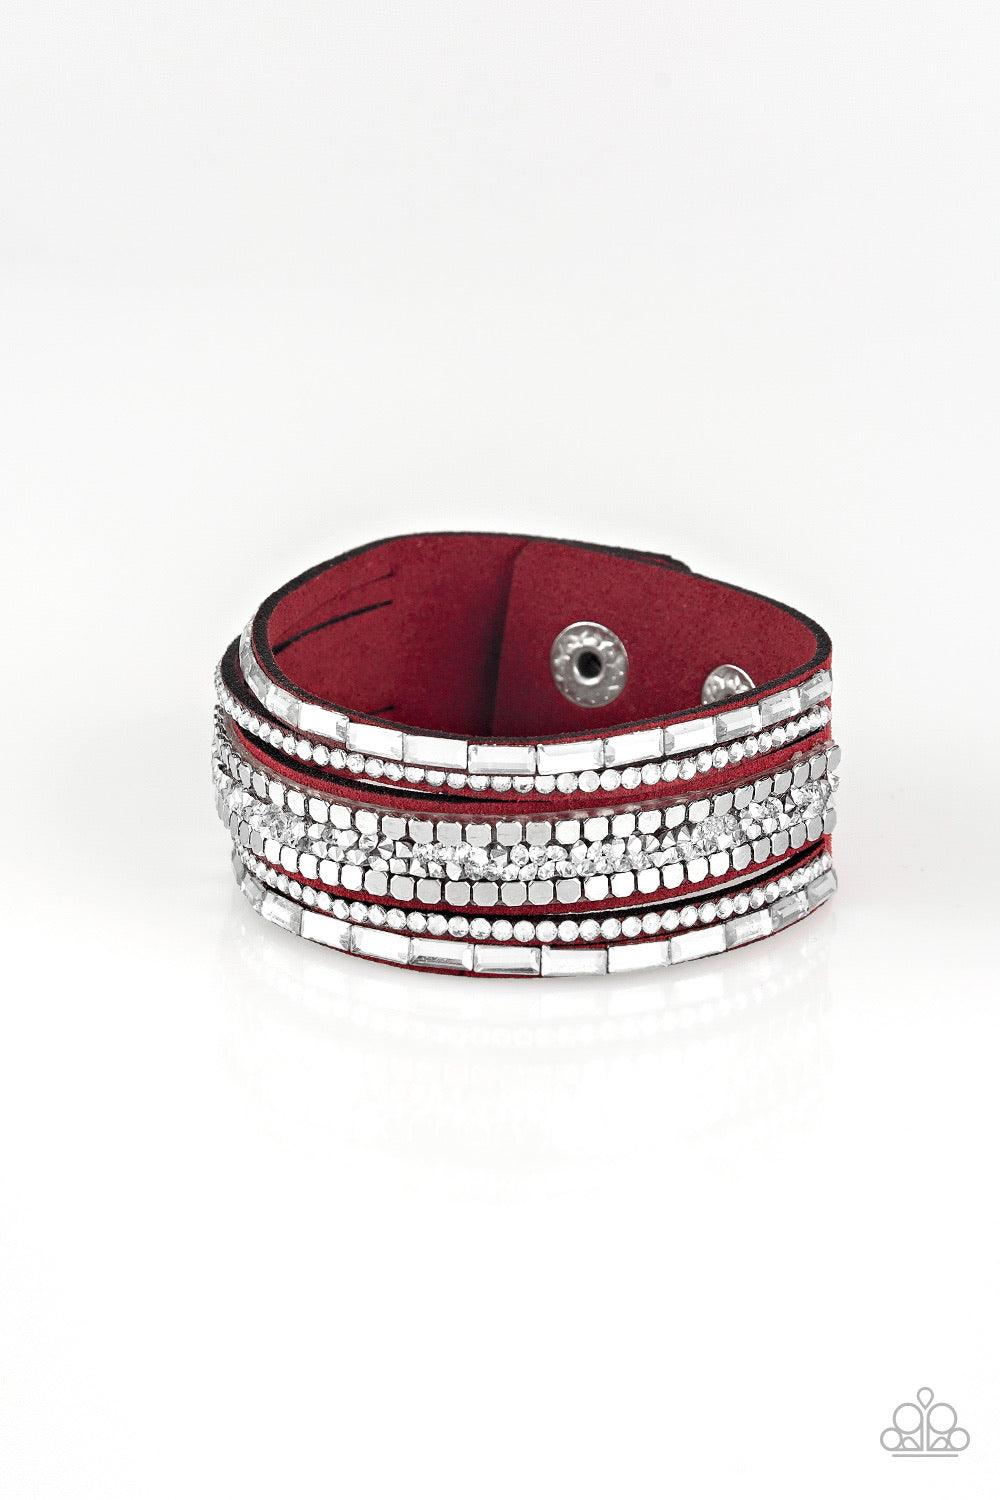 Paparazzi Accessories Rebel In Rhinestone - Red Featuring round and emerald style cuts, glassy white rhinestones join flat silver cubes and metallic prism rhinestones along a red suede band for a sassy look. Features an adjustable snap closure. Sold as on